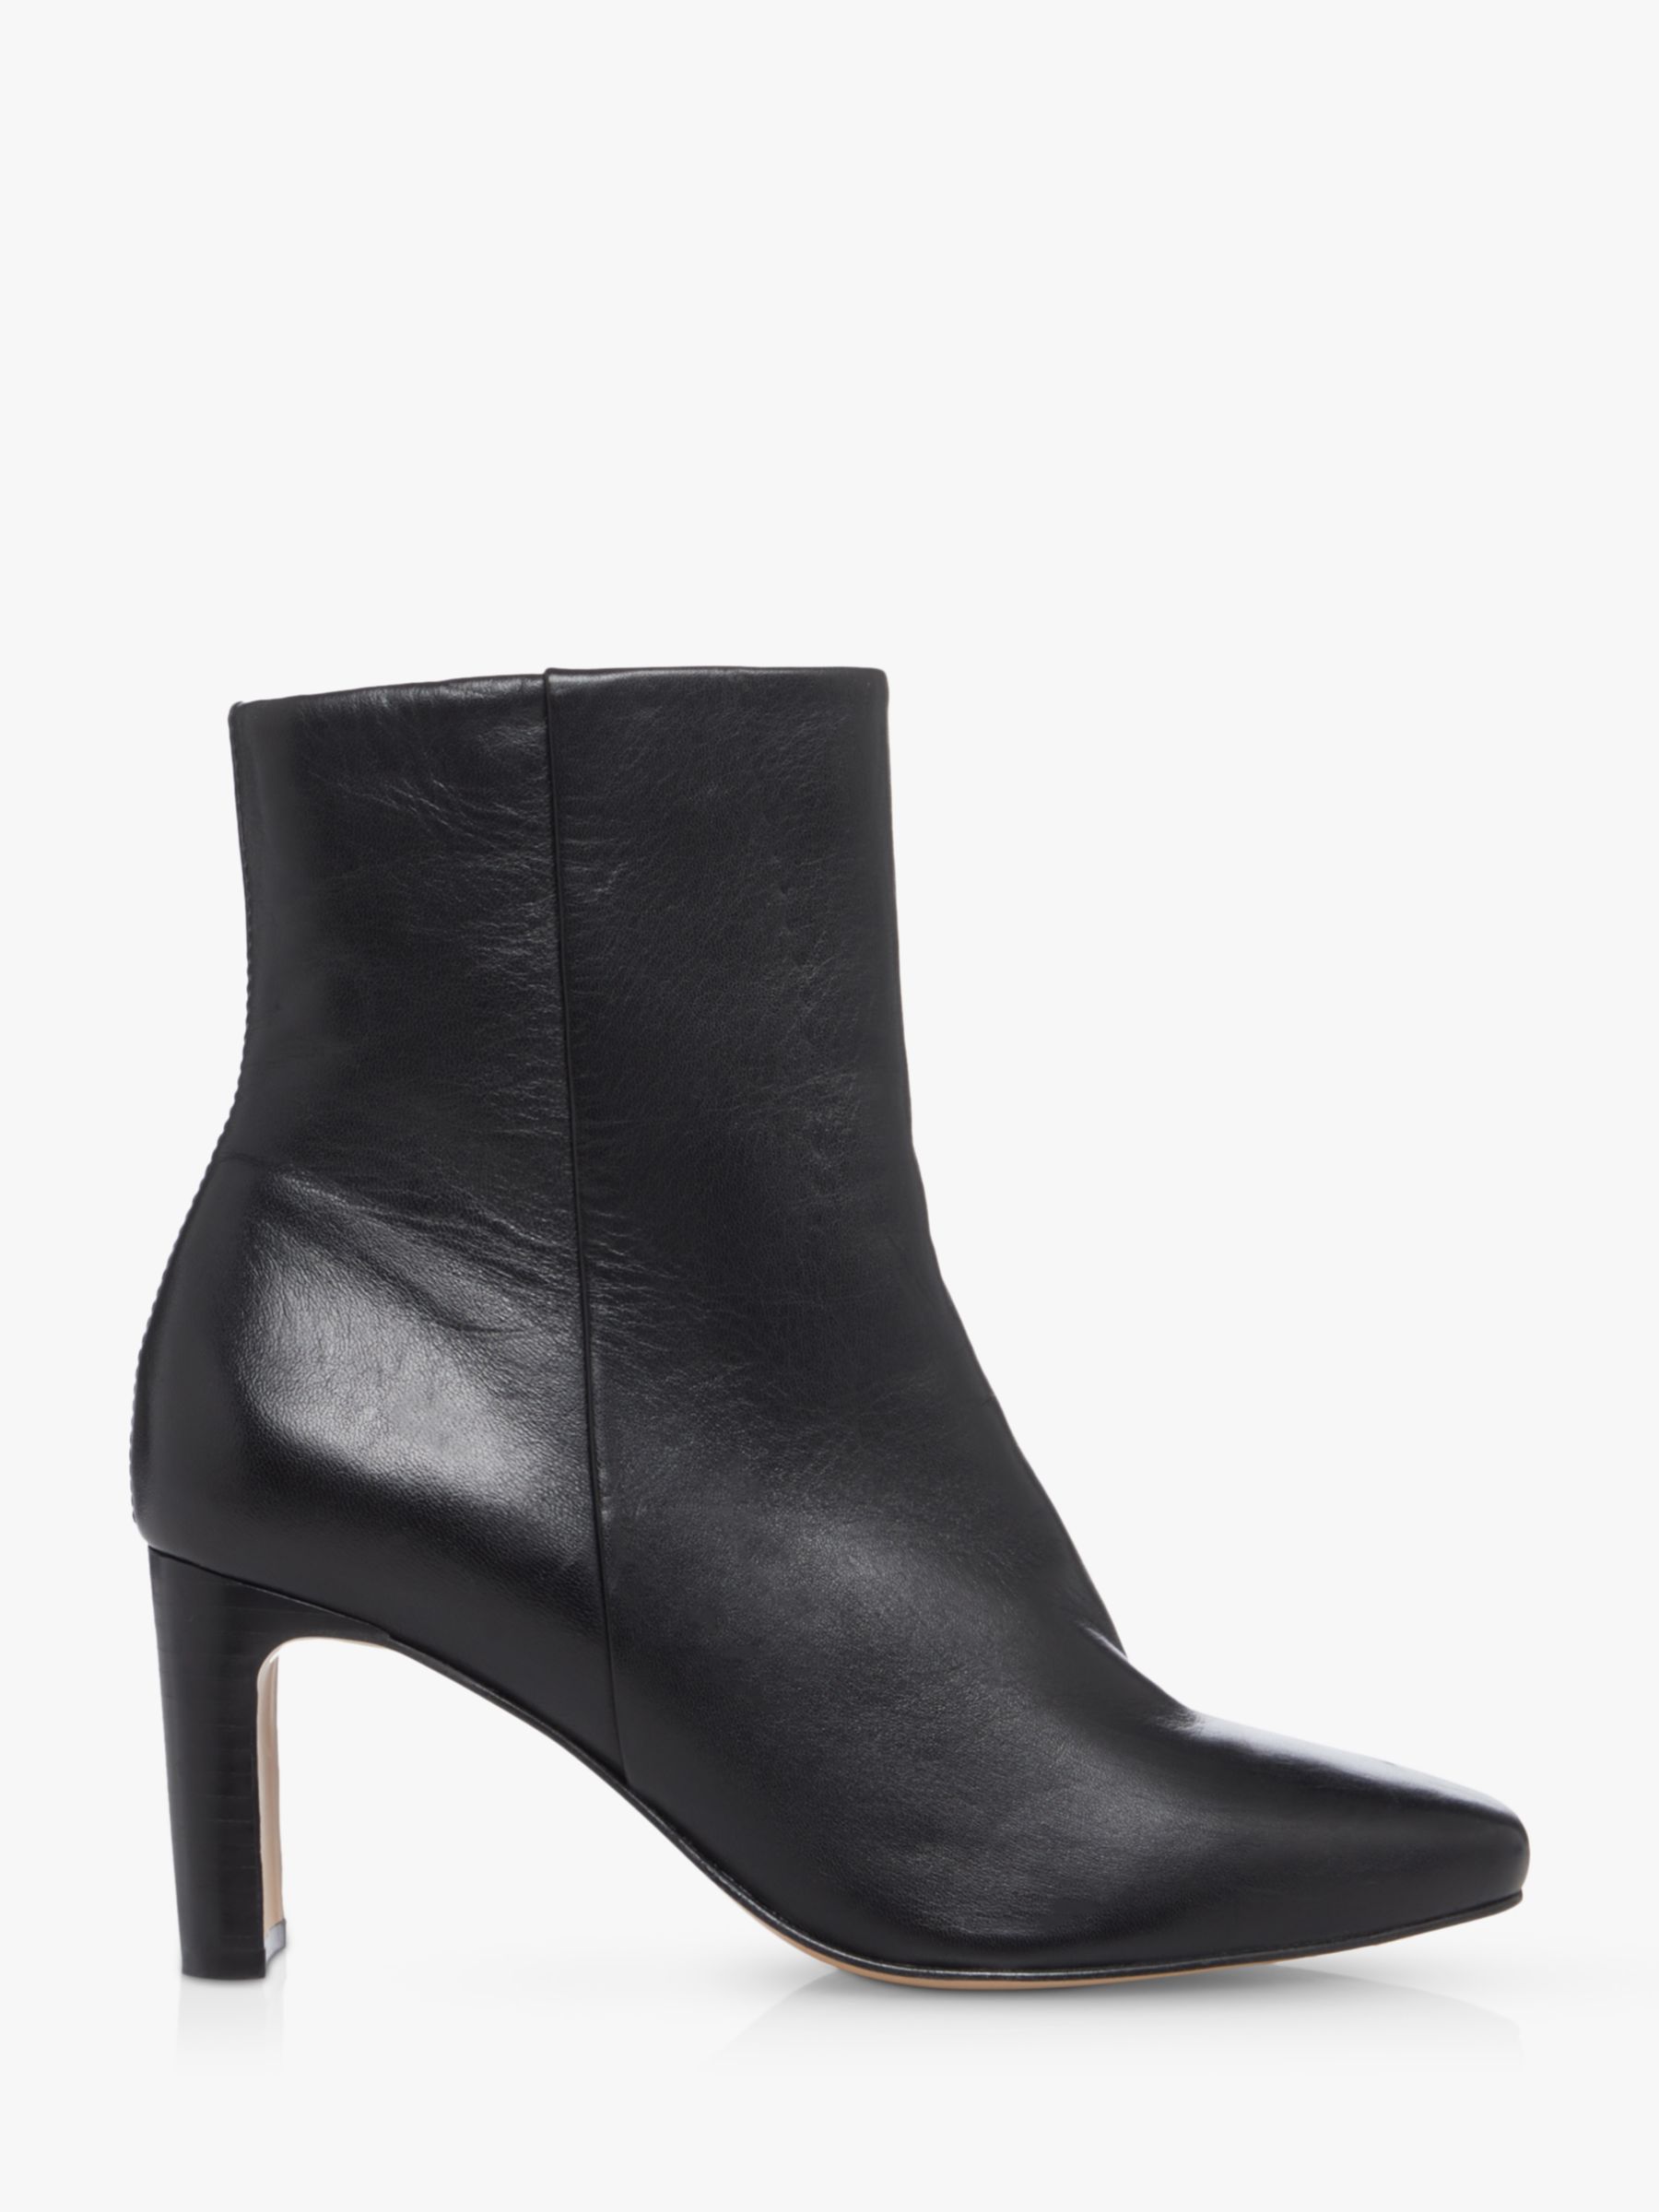 Dune Outshine Leather Camel Ankle Boots, Black at John Lewis & Partners